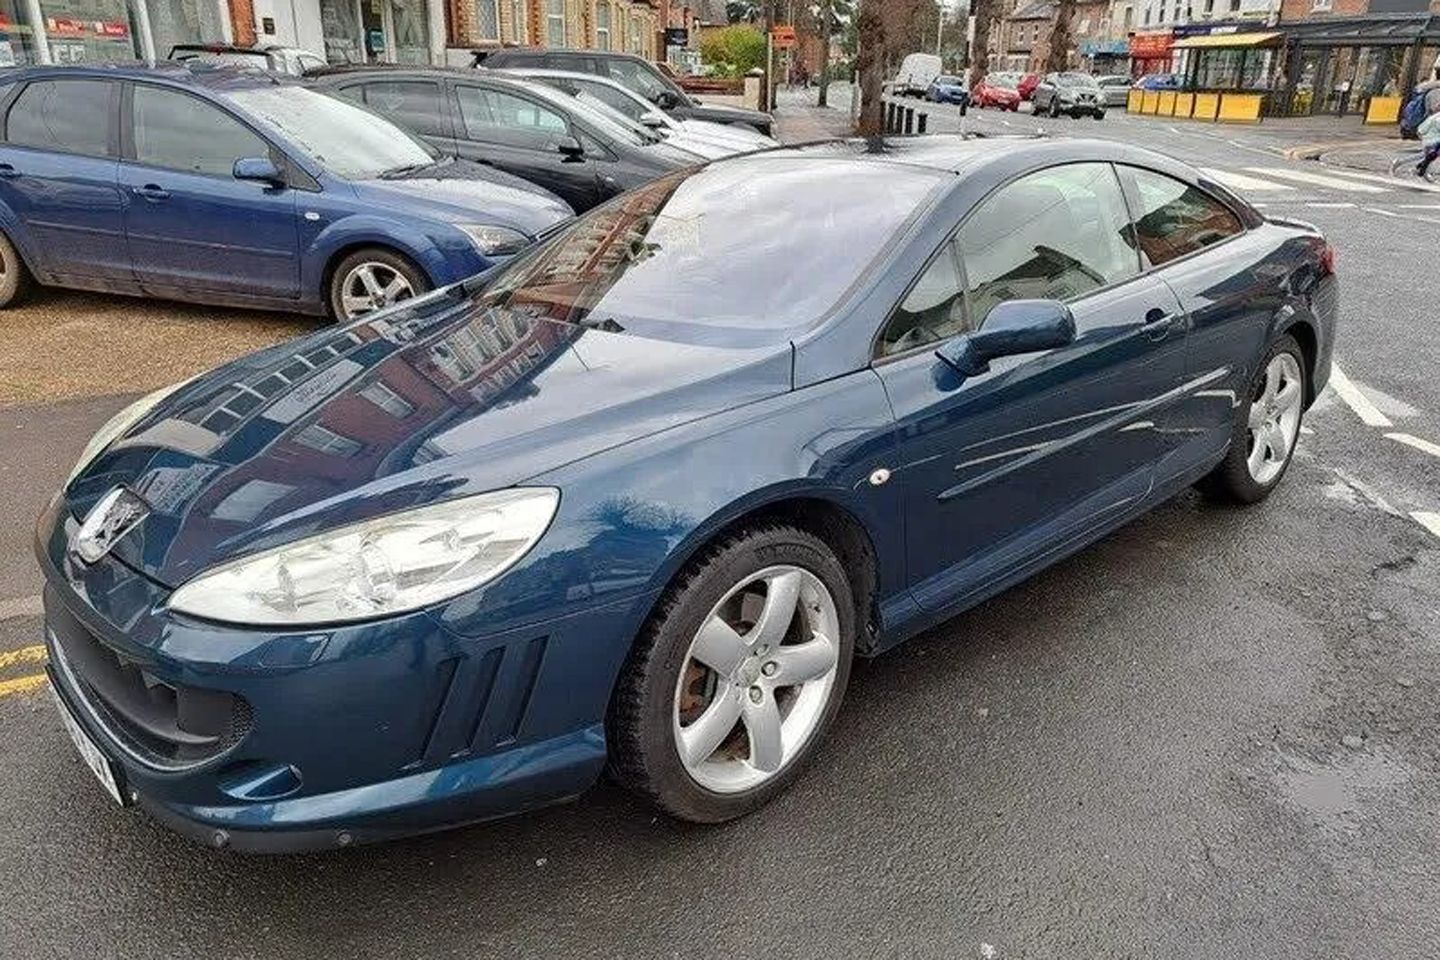 Used Car Bargain: The Peugeot 407 Coupe is Better Than You Think